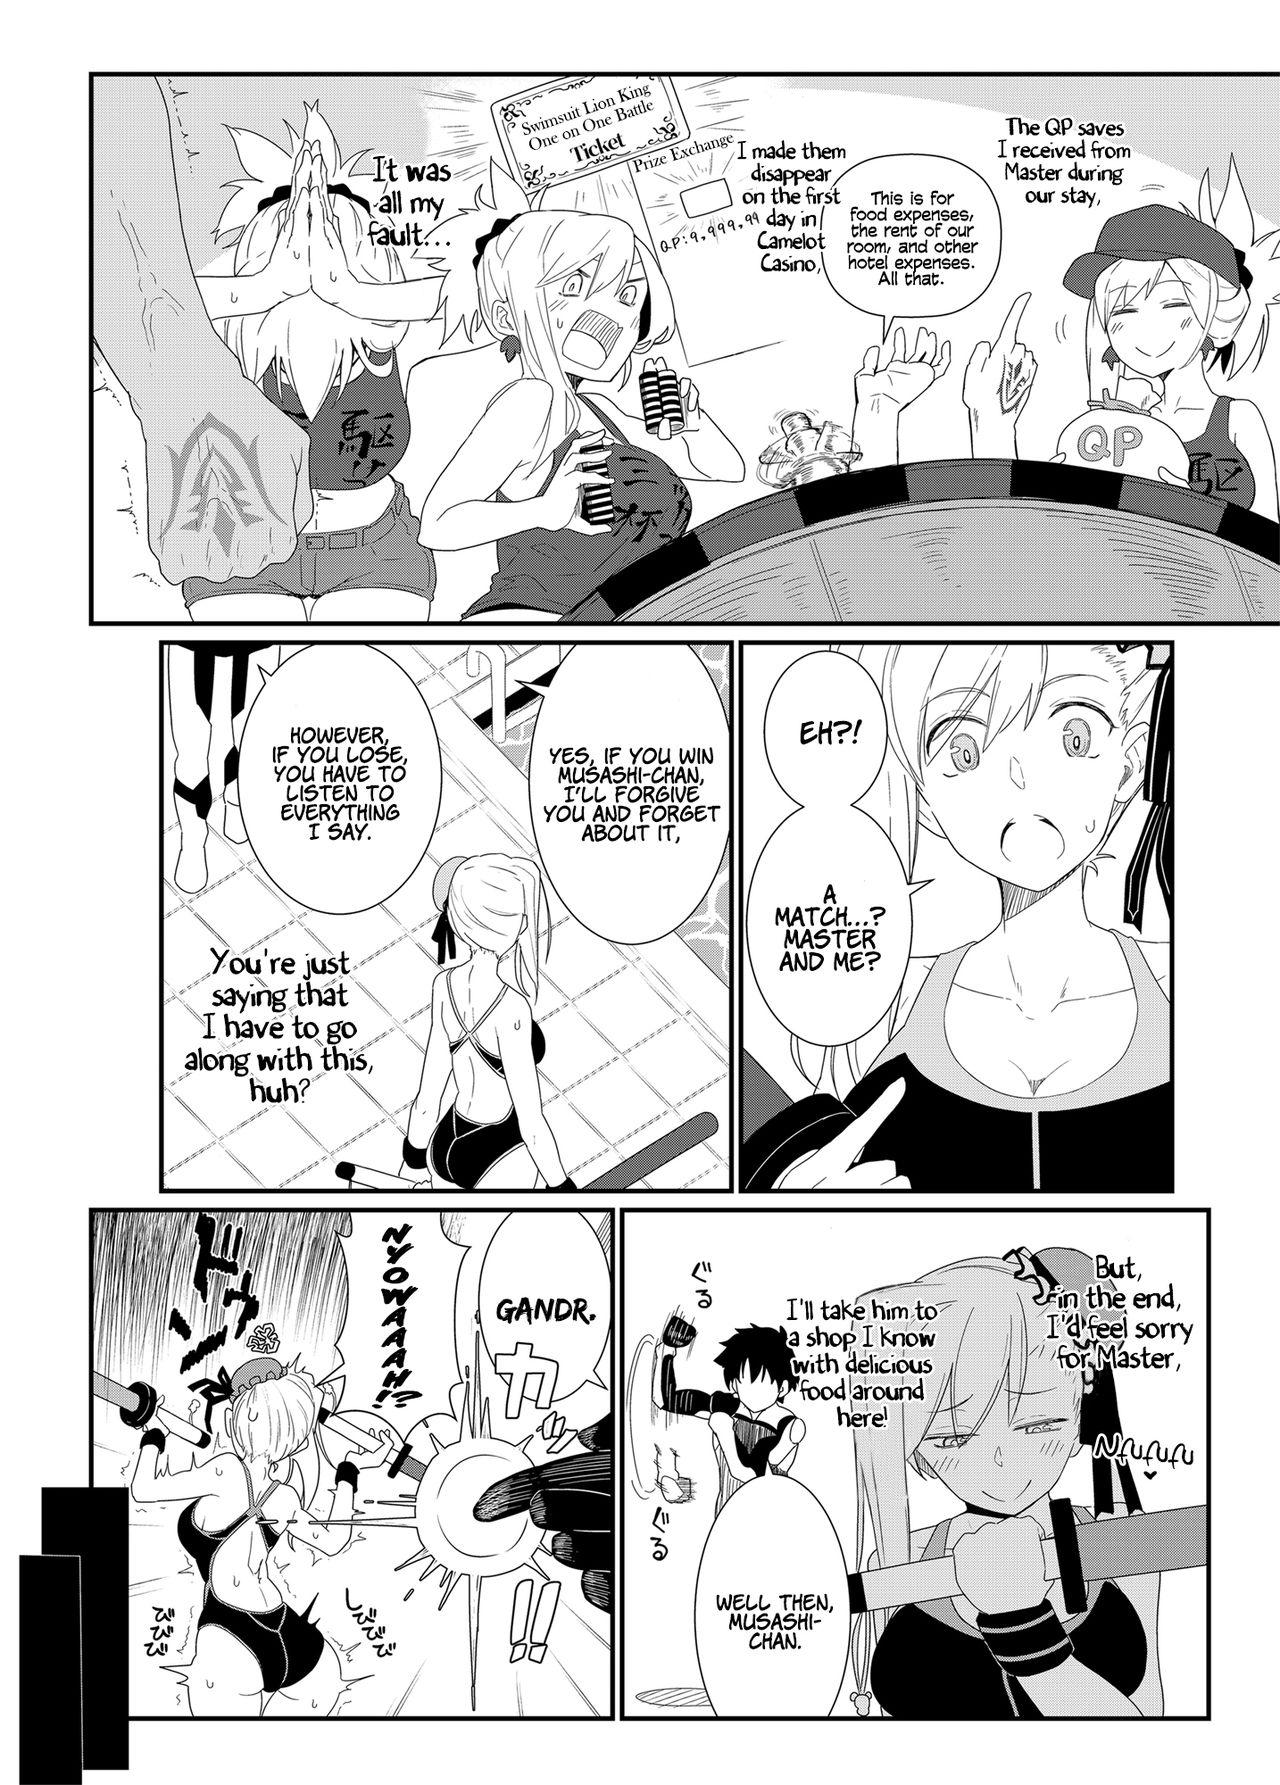 This GIRLFriend's 18 - Fate grand order Shecock - Page 5